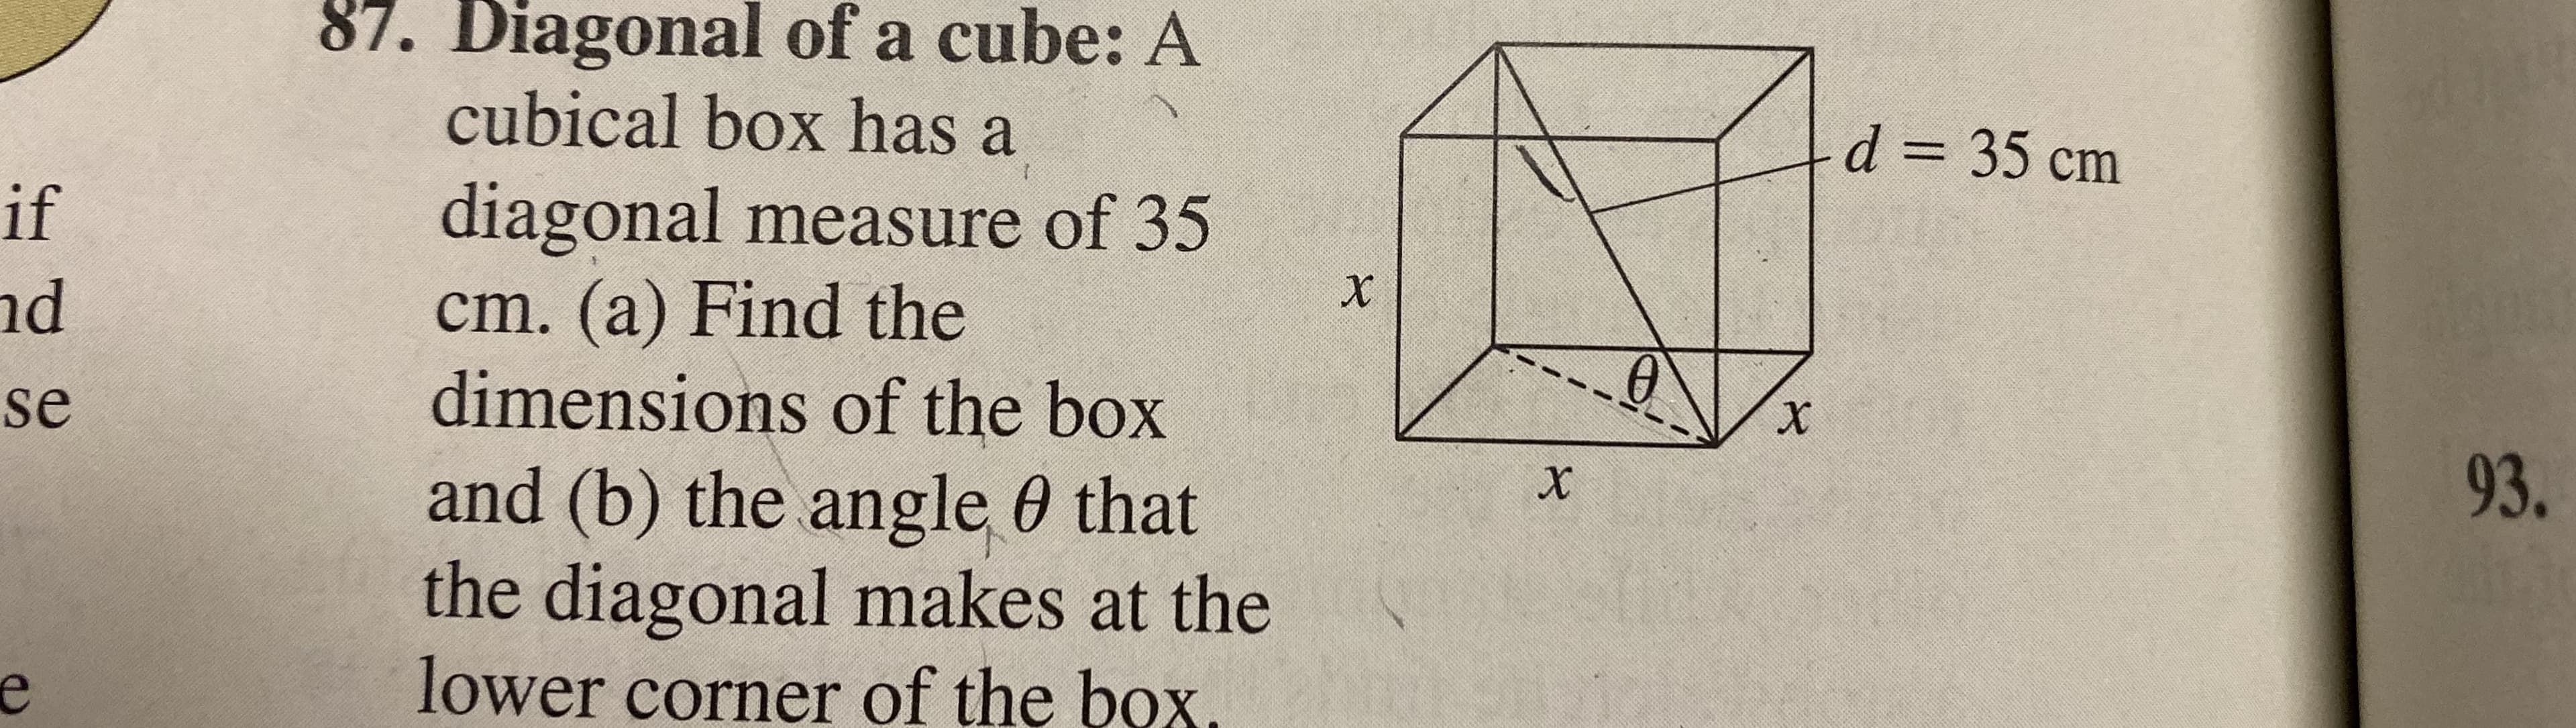 87. Diagonal of a cube: A
cubical box has a
diagonal measure of 35
cm. (a) Find the
dimensions of the box
and (b) the angle 0 that
the diagonal makes at the
lower corner of the box.
d 35 cm
if
d
se
93.
